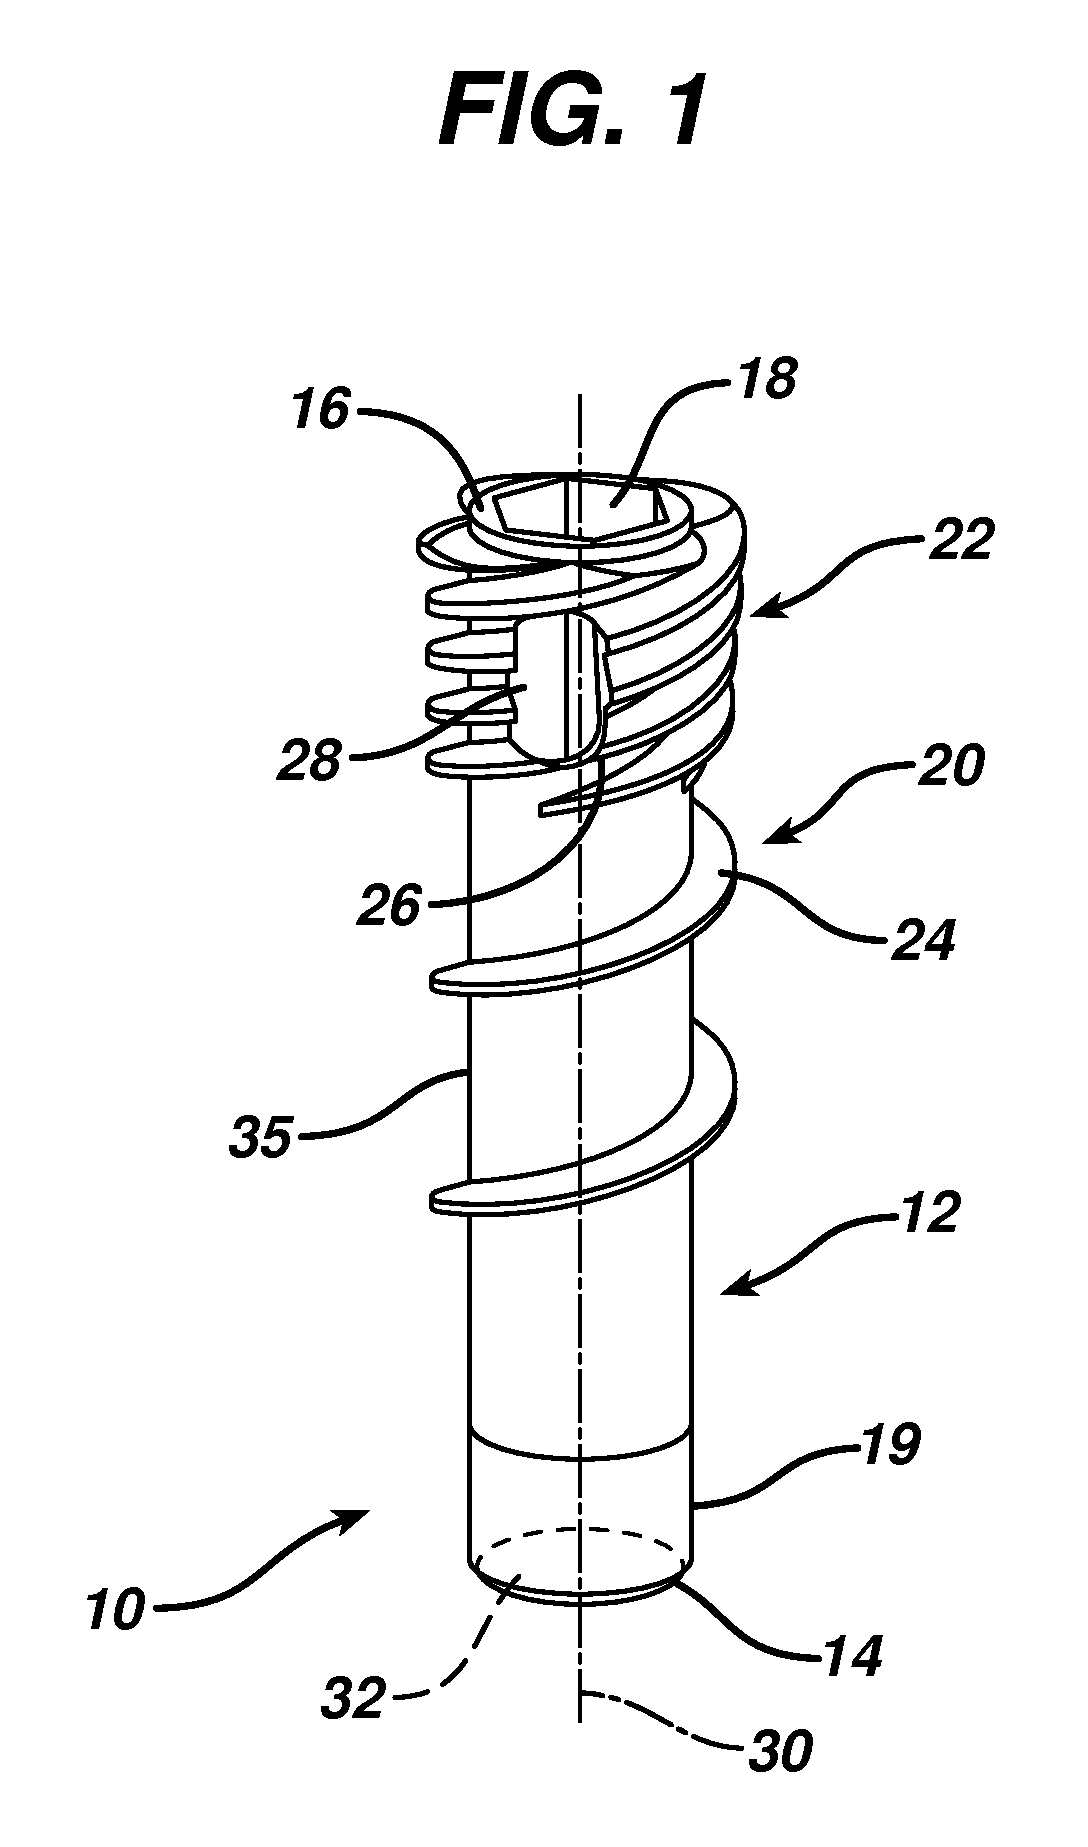 Knotless suture anchor and driver